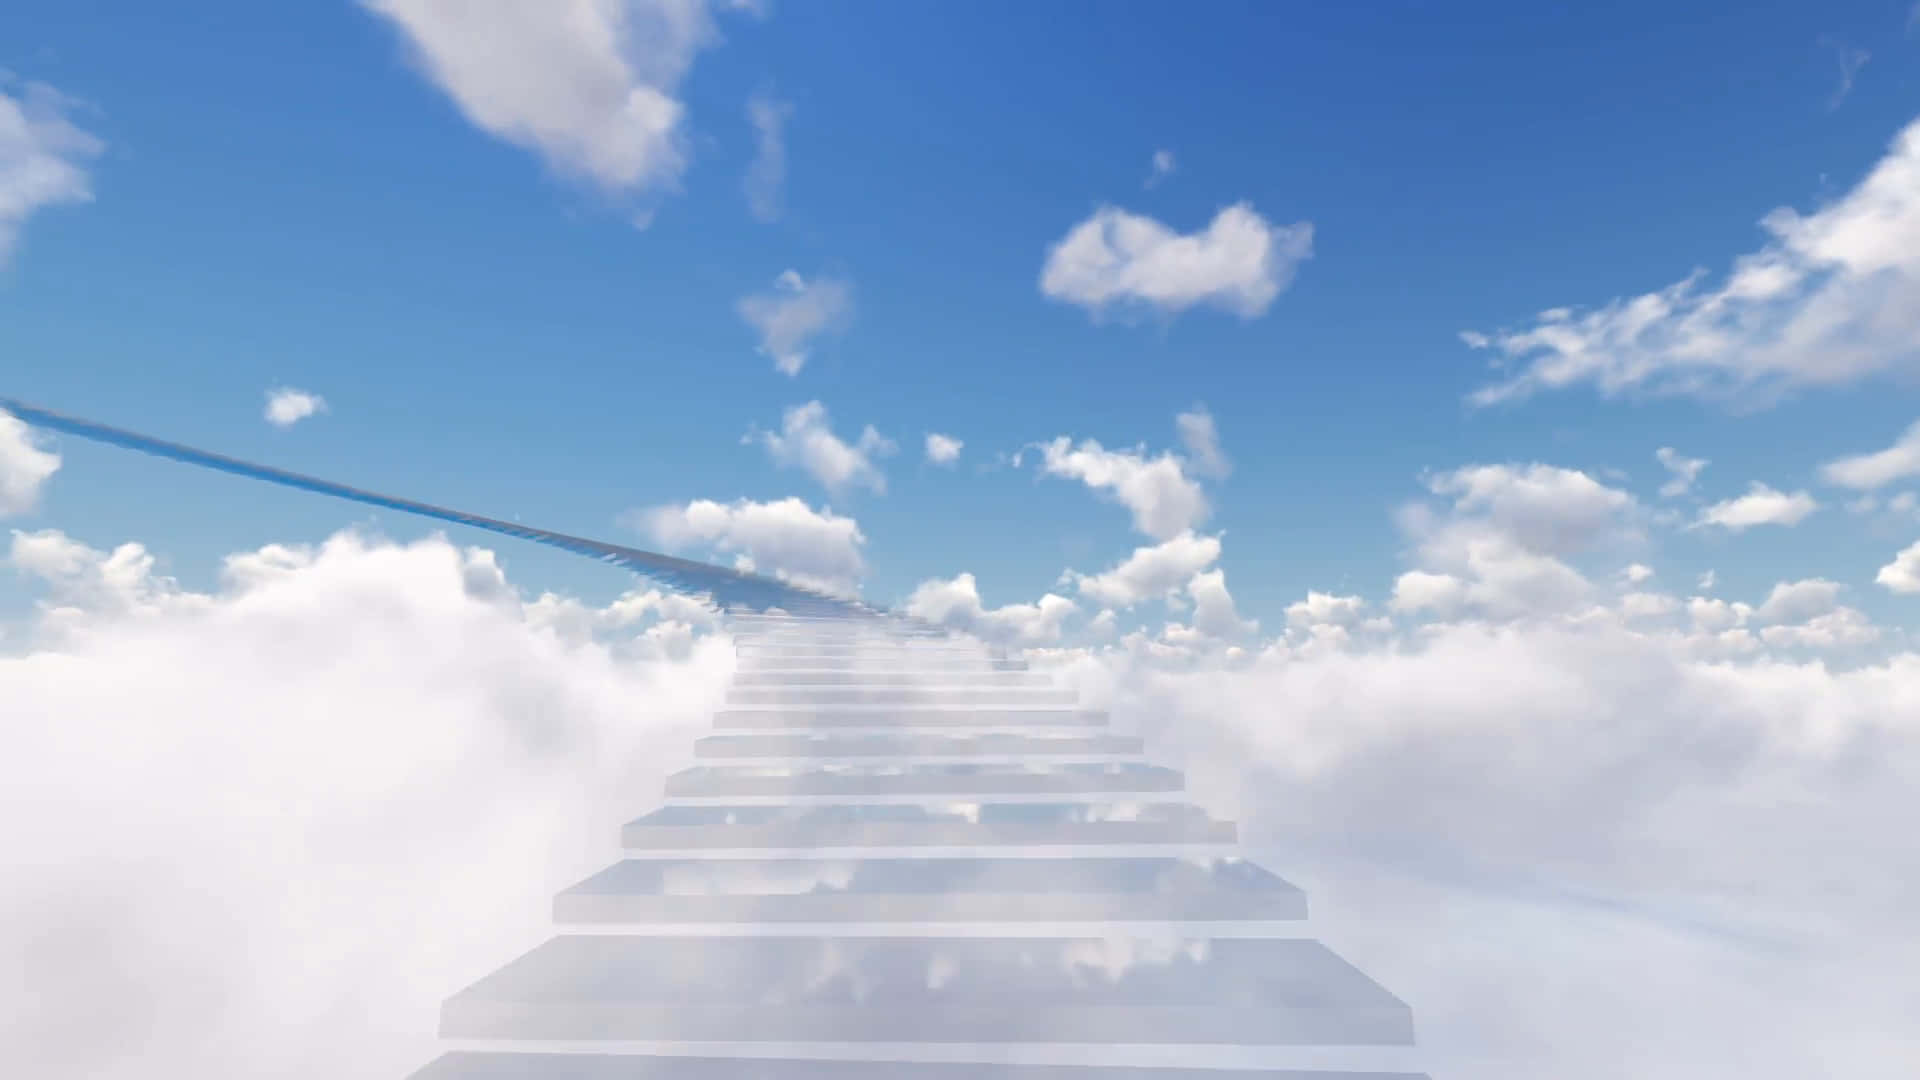 “Taking the path less traveled - Stairway to Heaven” Wallpaper